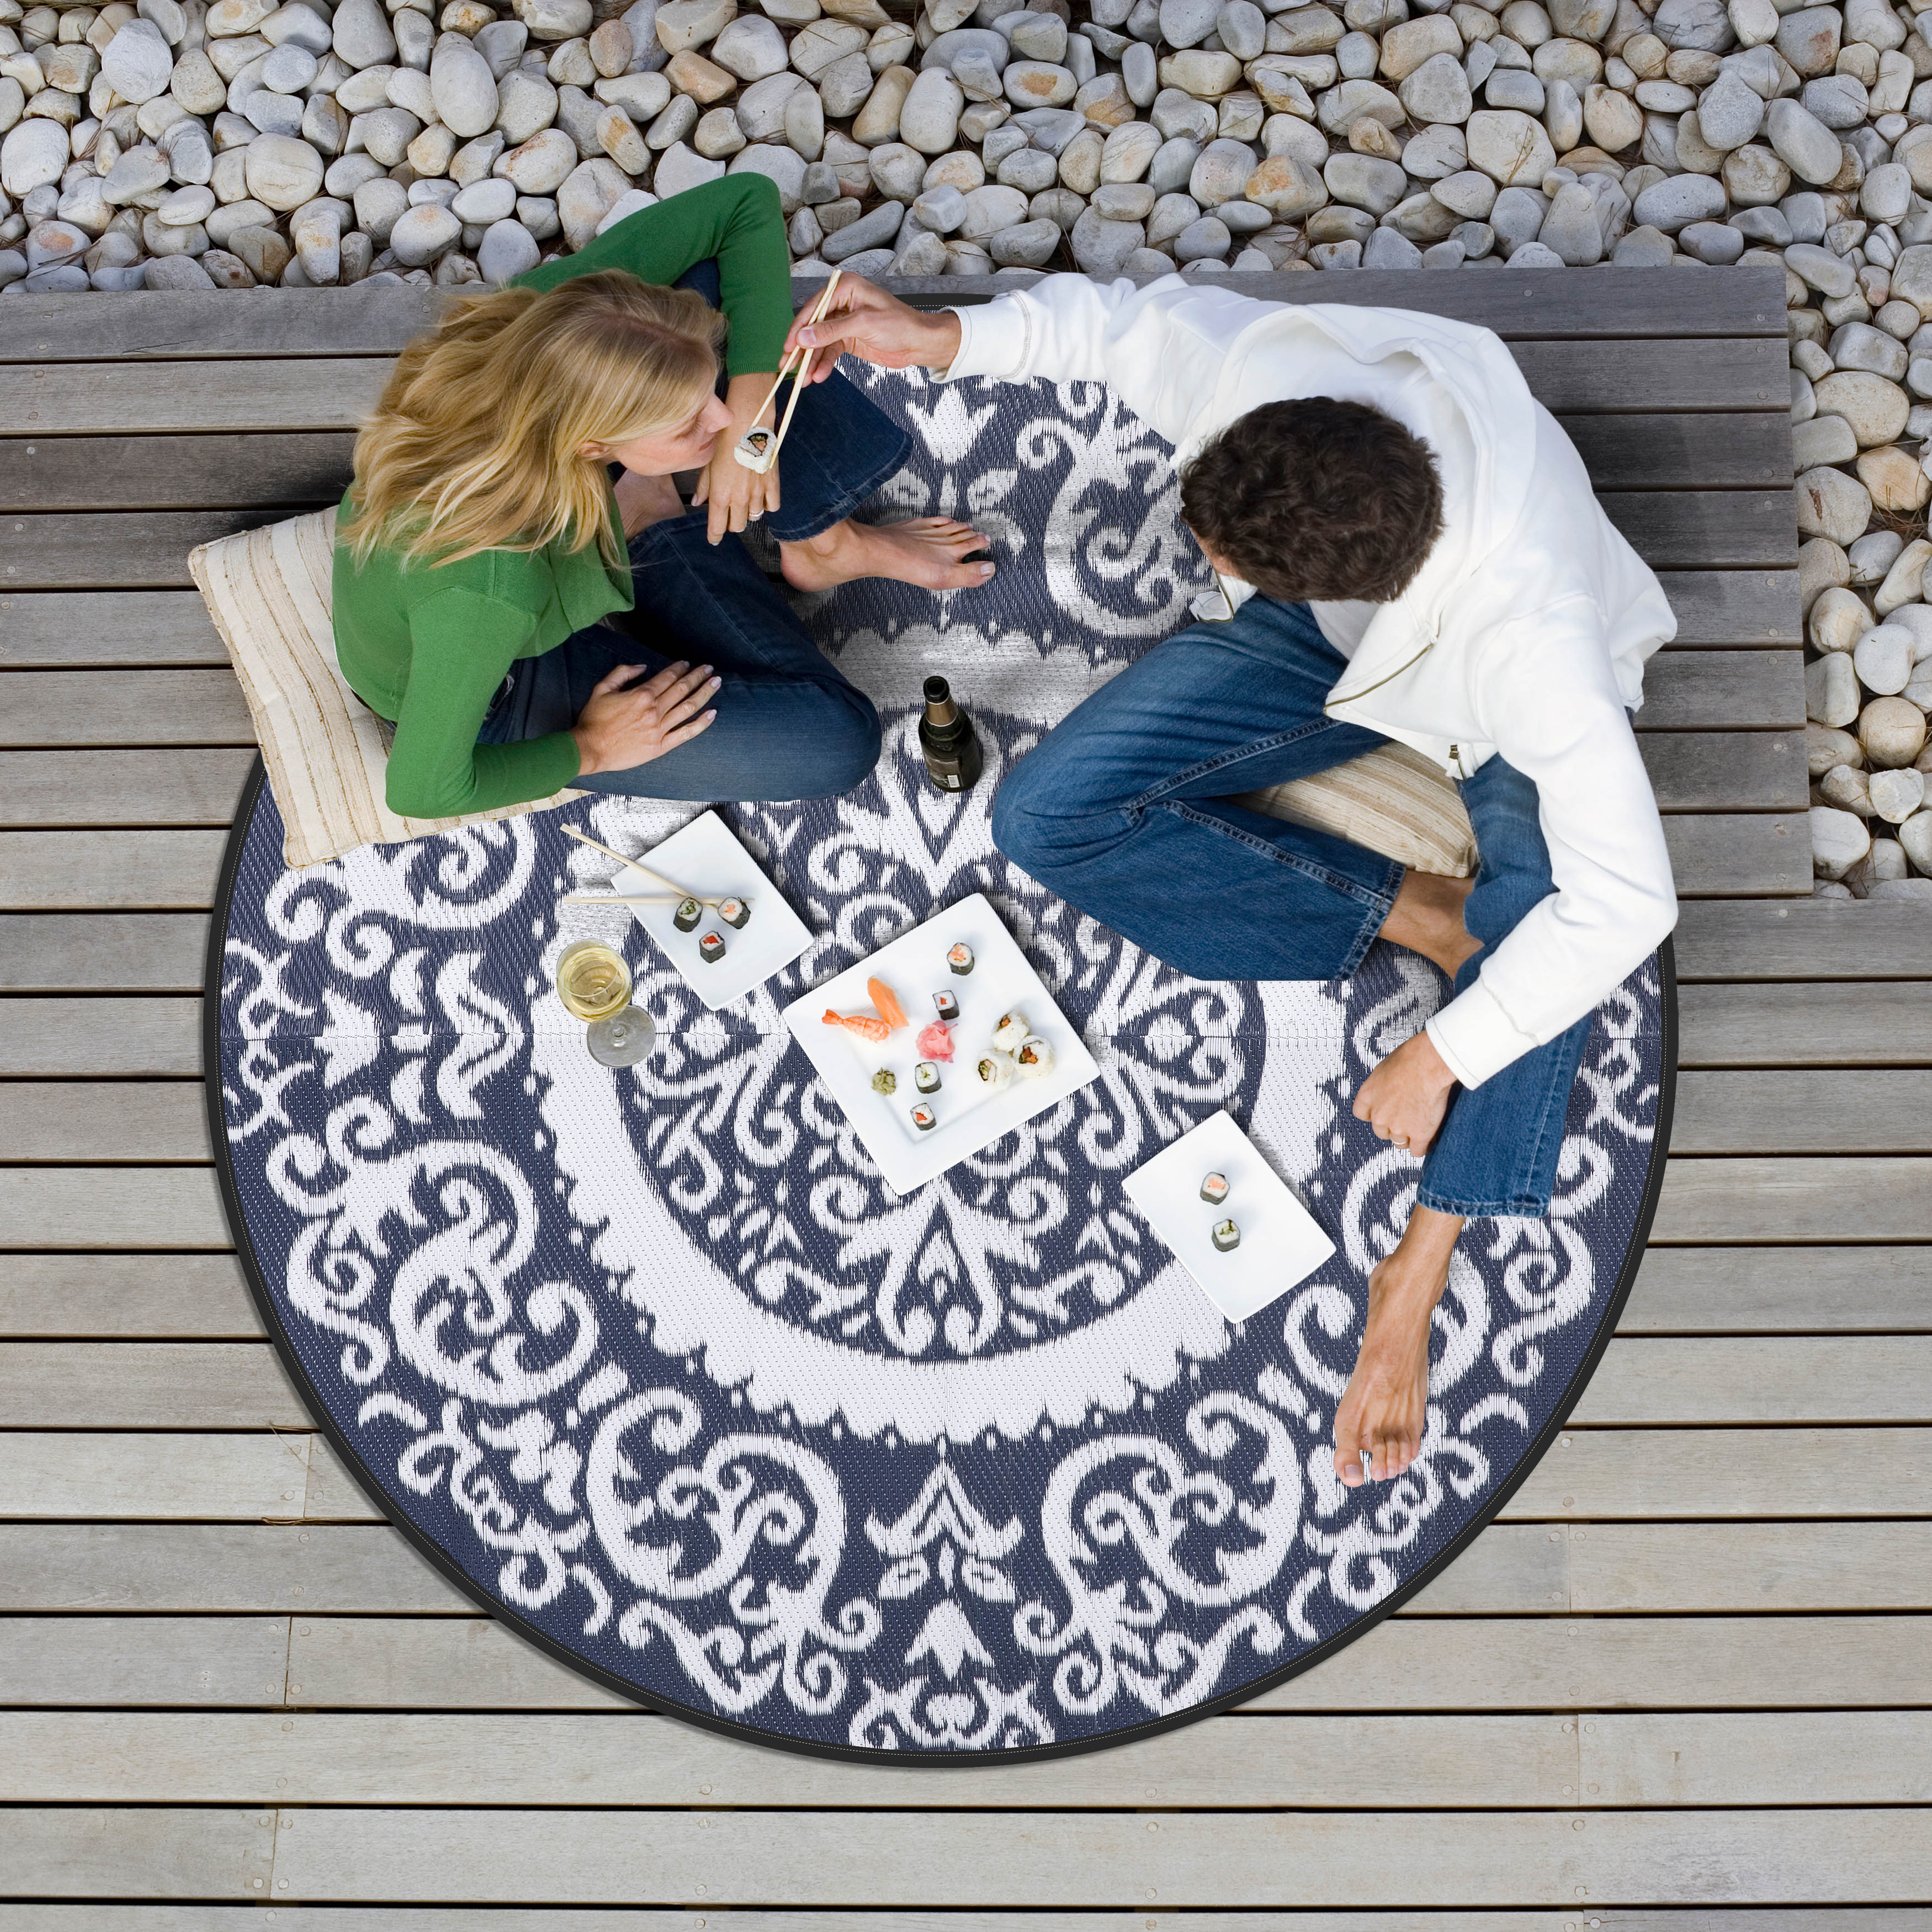 Nuu Garden 5 ft Round Outdoor Rug, Plastic Straw Foldable Area Rug for Patios, Front Door Entry, Entryway, Deck, Balcony - image 1 of 8